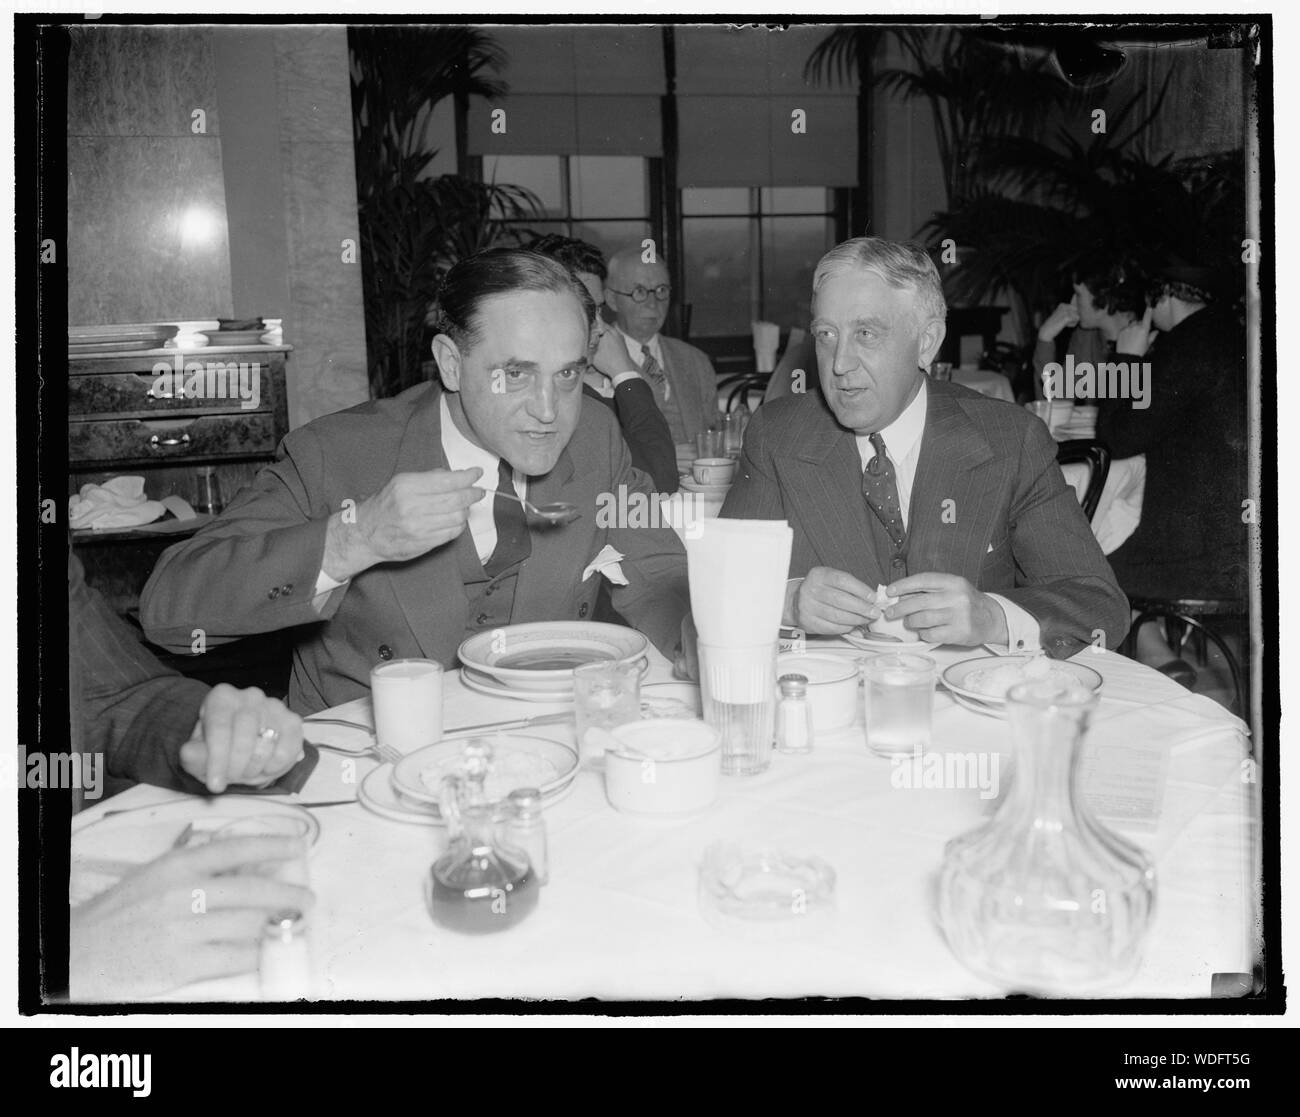 Gentlemen from Indiana. Washington, D.C., Nov. 15. Democratic Senator Sherman Minton of Indiana, takes time out at the opening of the special session to enjoy a bit of lunch in the Capitol restaurant. 11/15/37 Abstract/medium: 1 negative : glass  4 x 5 in. or smaller Stock Photo